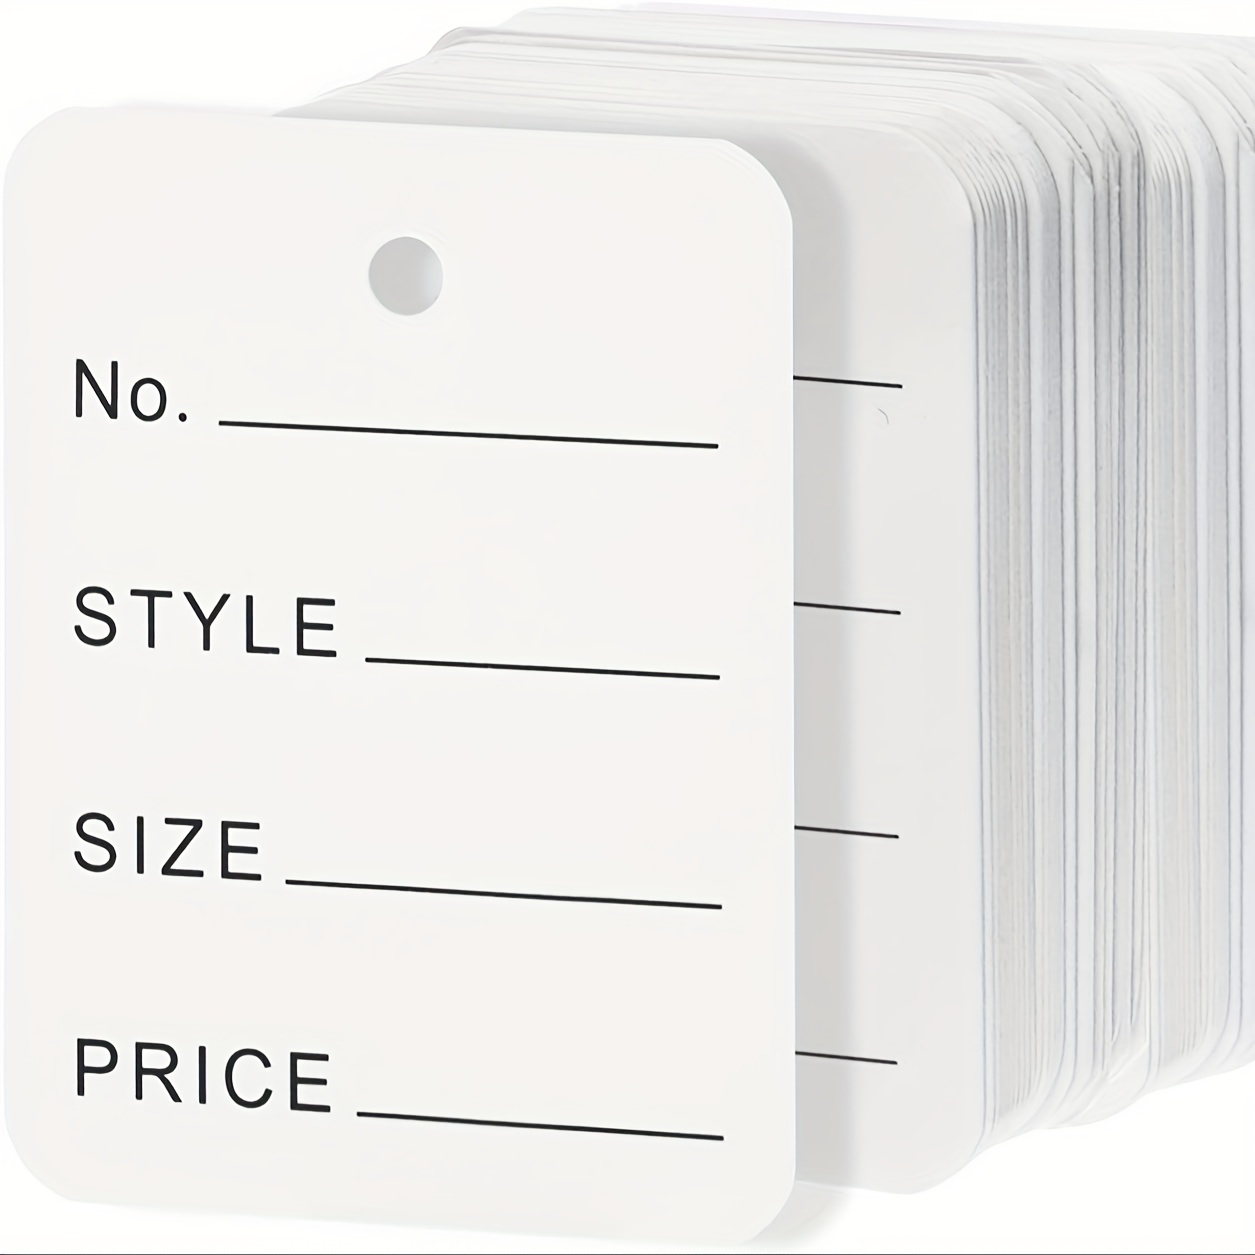 G2PLUS 1000 Pcs Price Tags, Clothes Size Tags Coupon Tags Making Tag White Store Tags Clothing Tags, 1.94 x 1.38